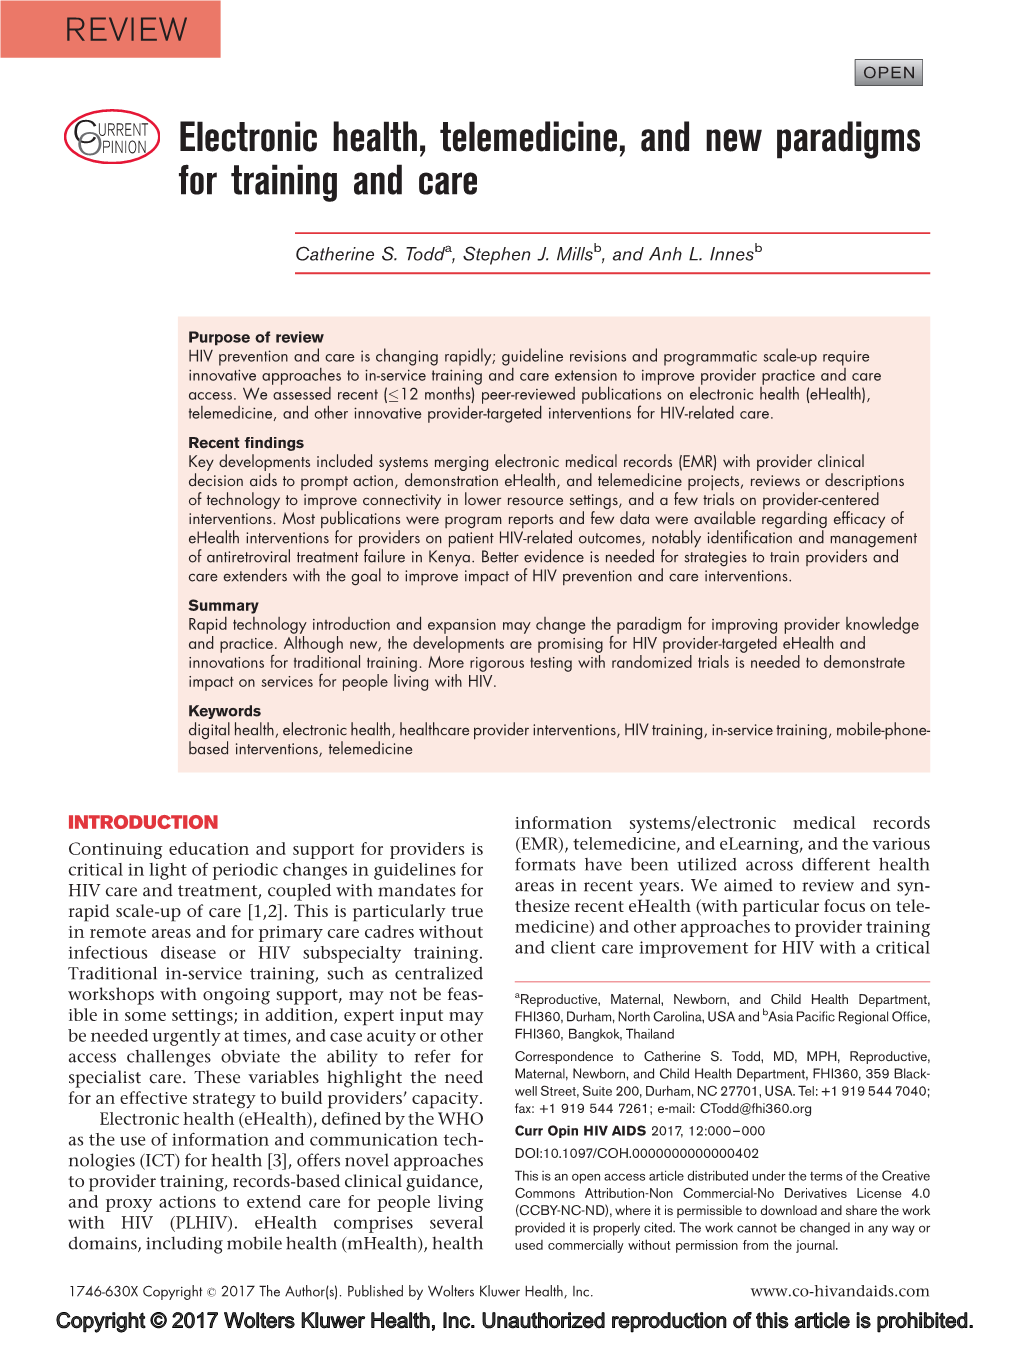 Electronic Health, Telemedicine, and New Paradigms for Training and Care